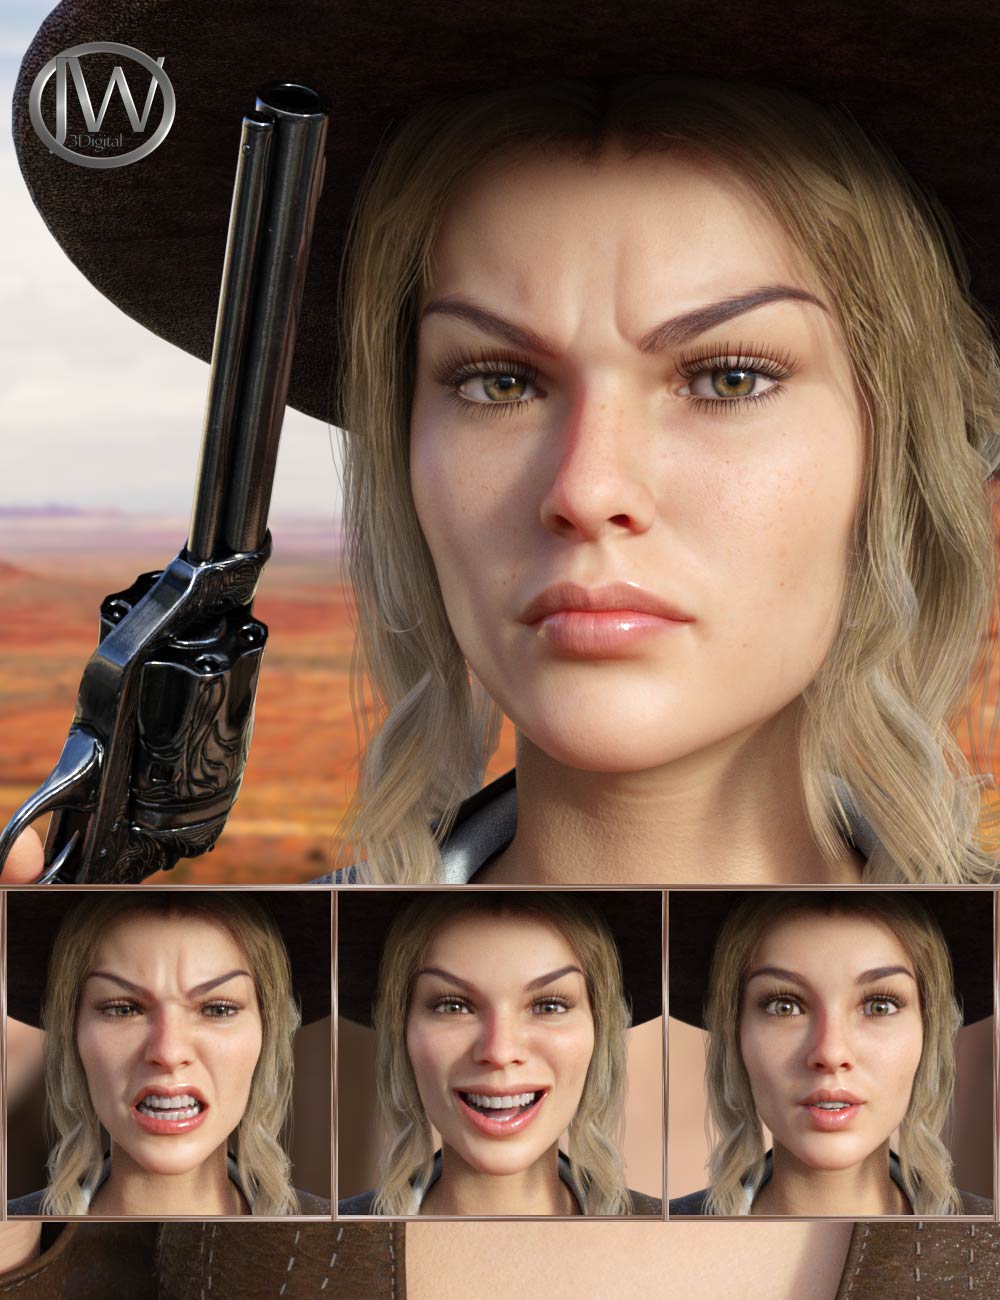 Western Girl - Expressions for Genesis 8 Female and Honni 8 by: JWolf, 3D Models by Daz 3D